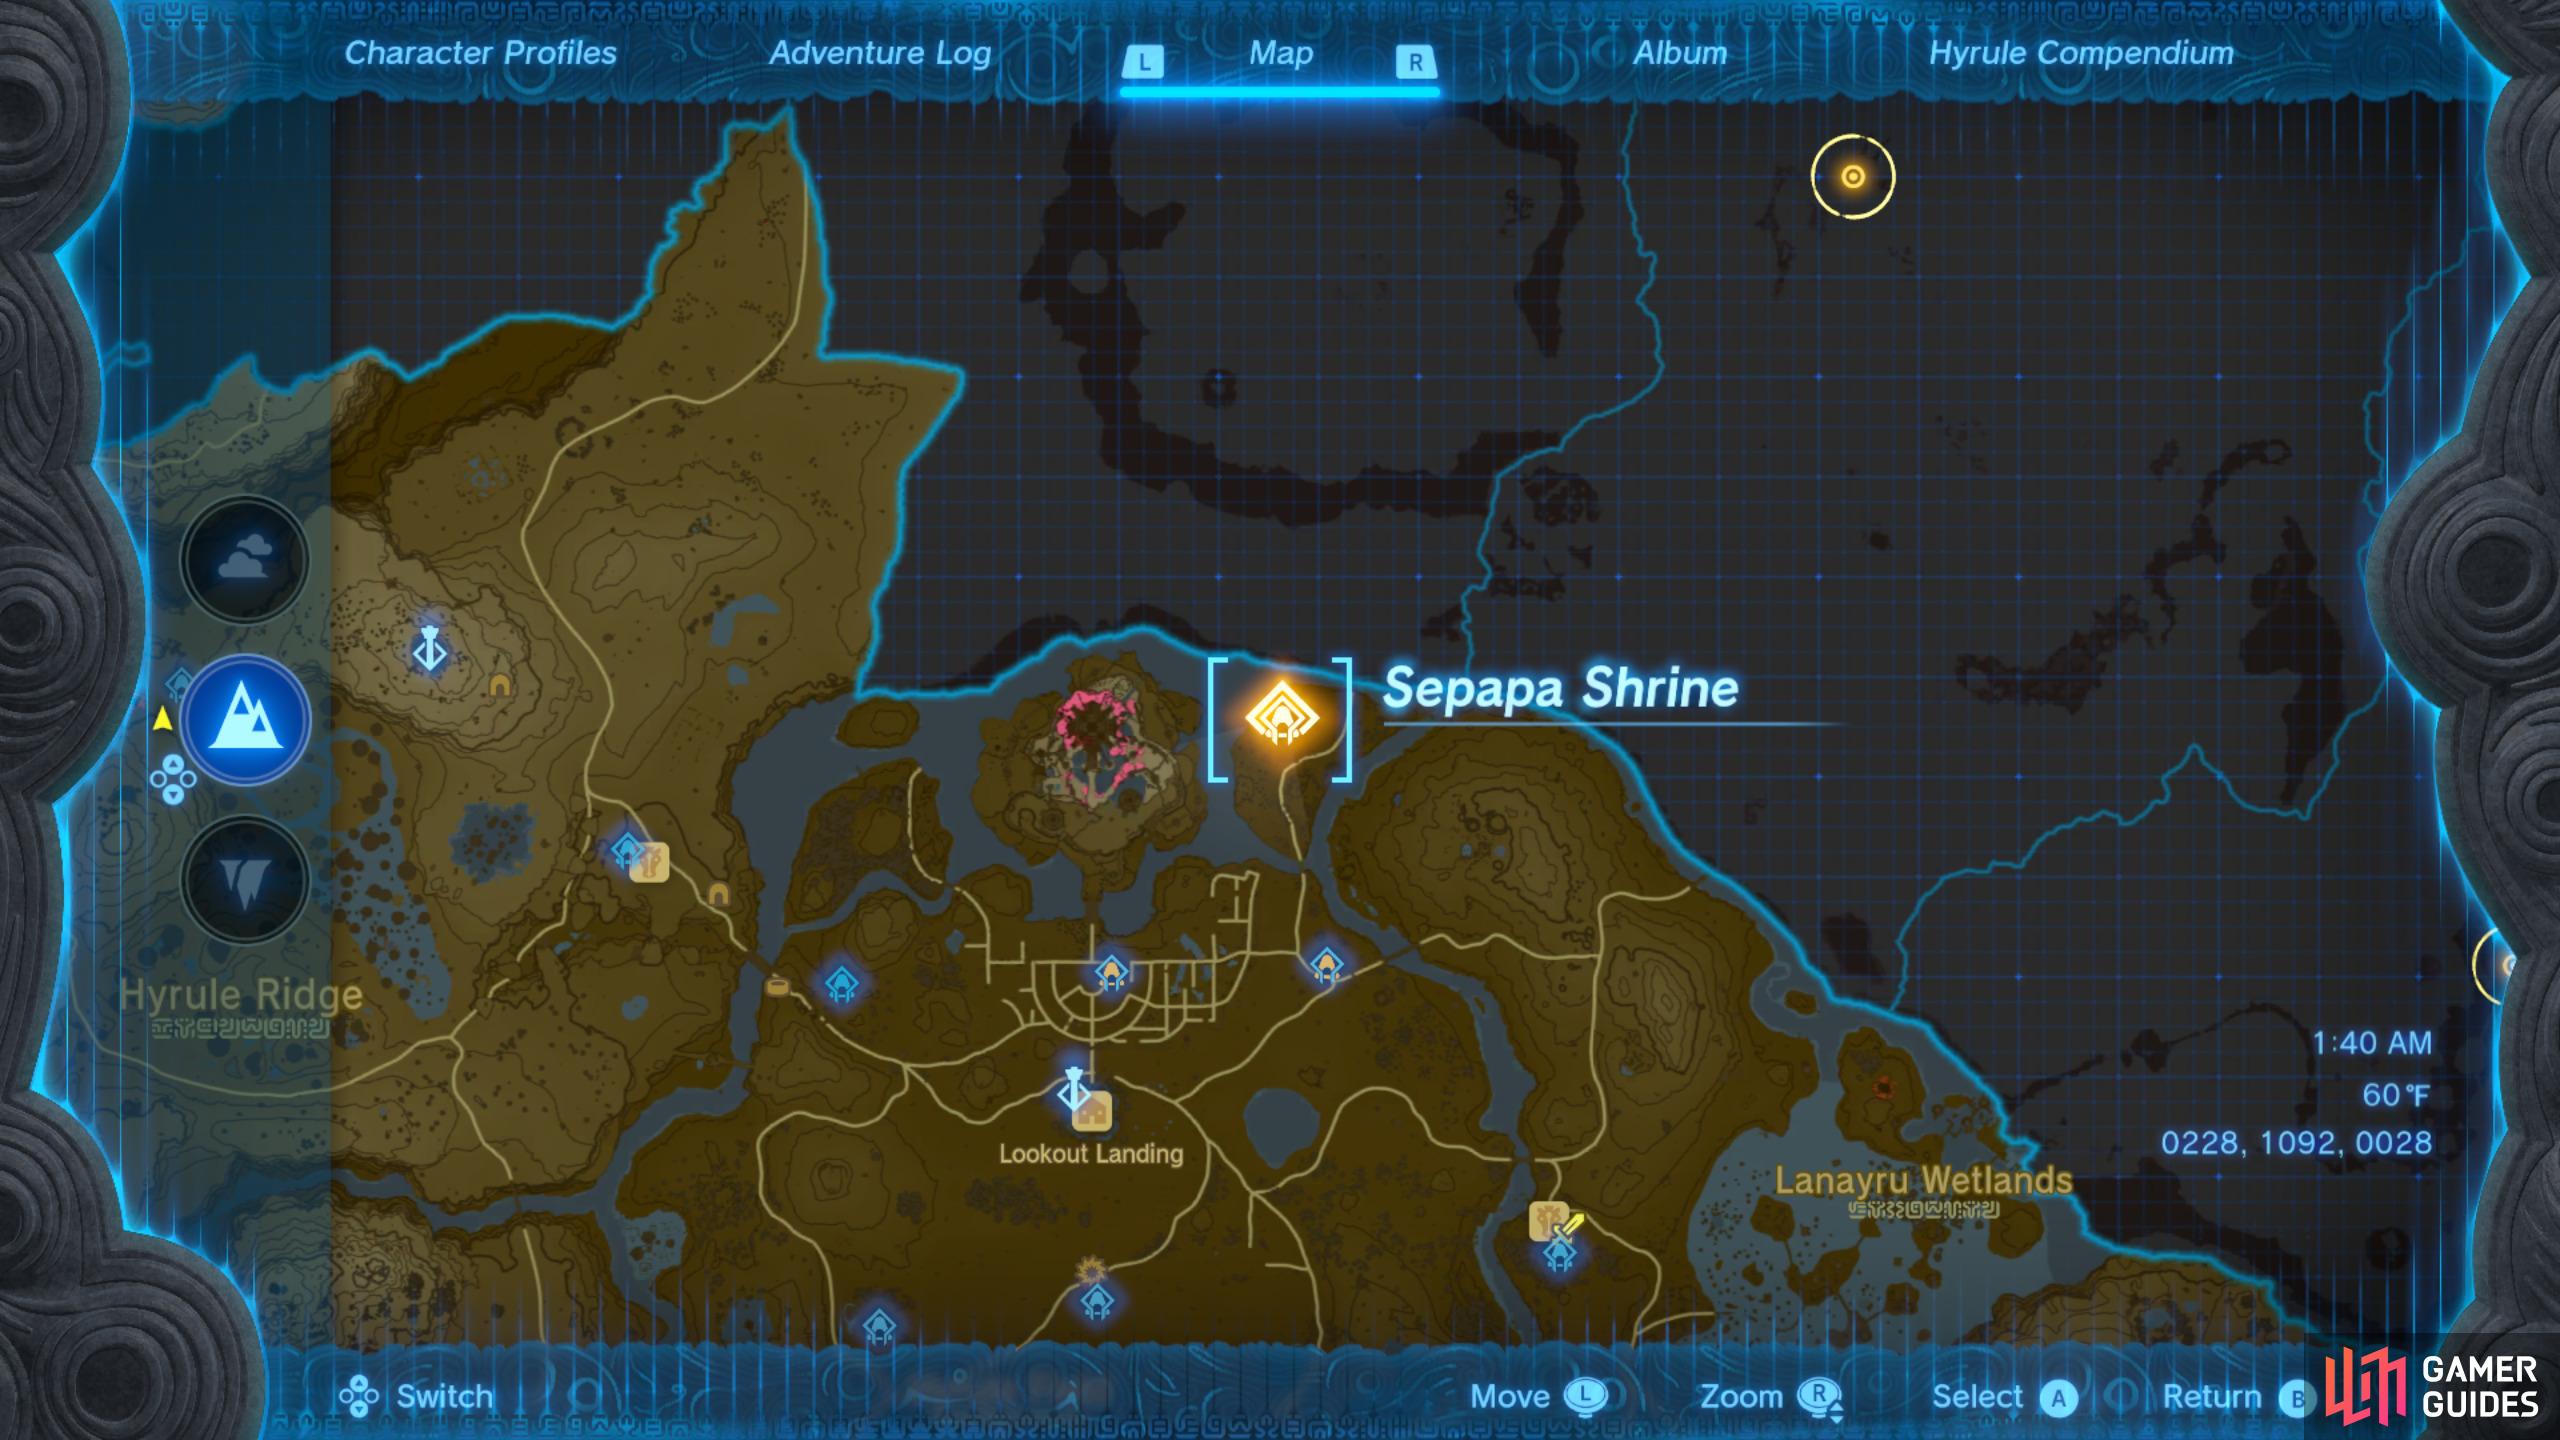 Head to this location on the map to find the Sepapa Shrine. 